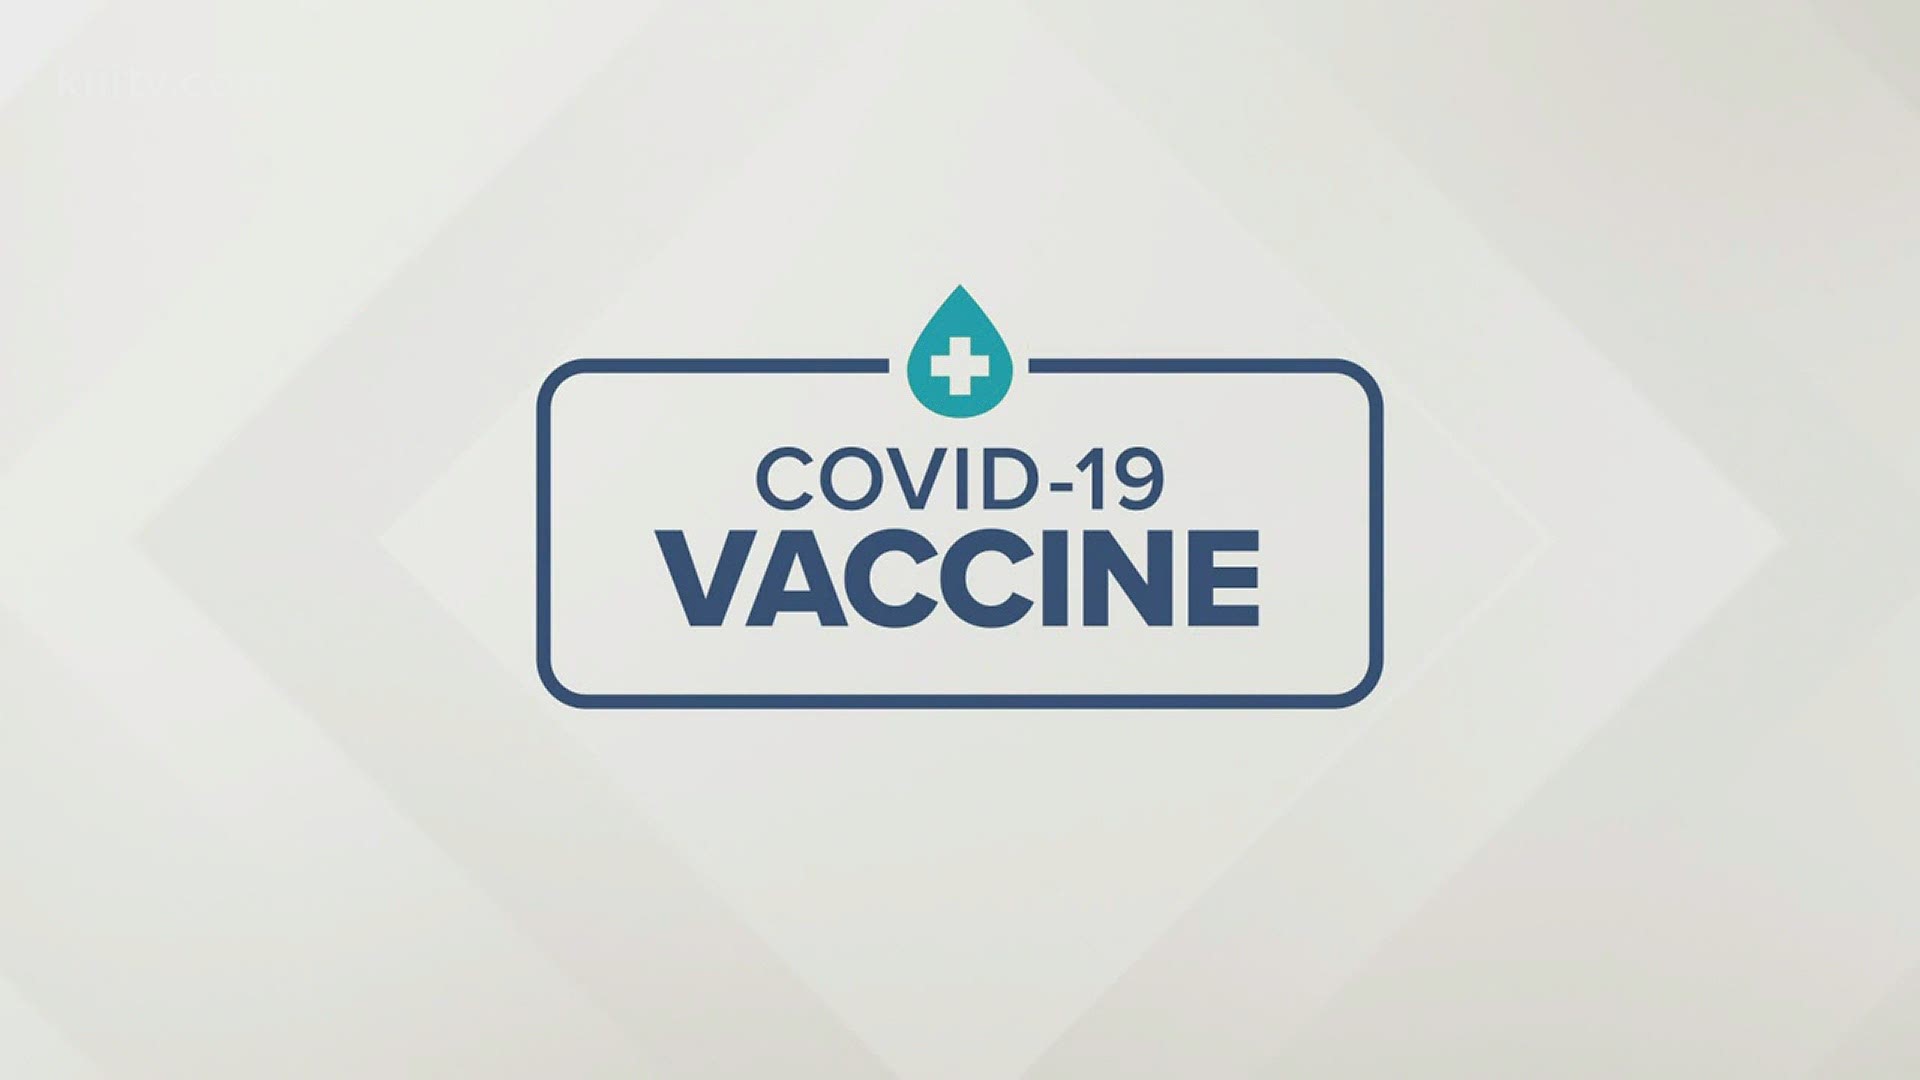 Curative Texas GM of field operations Jamil Sabbagh told 6 News Monday the company will work to vaccinate up to 500 people a day at each of two drive-thru locations.